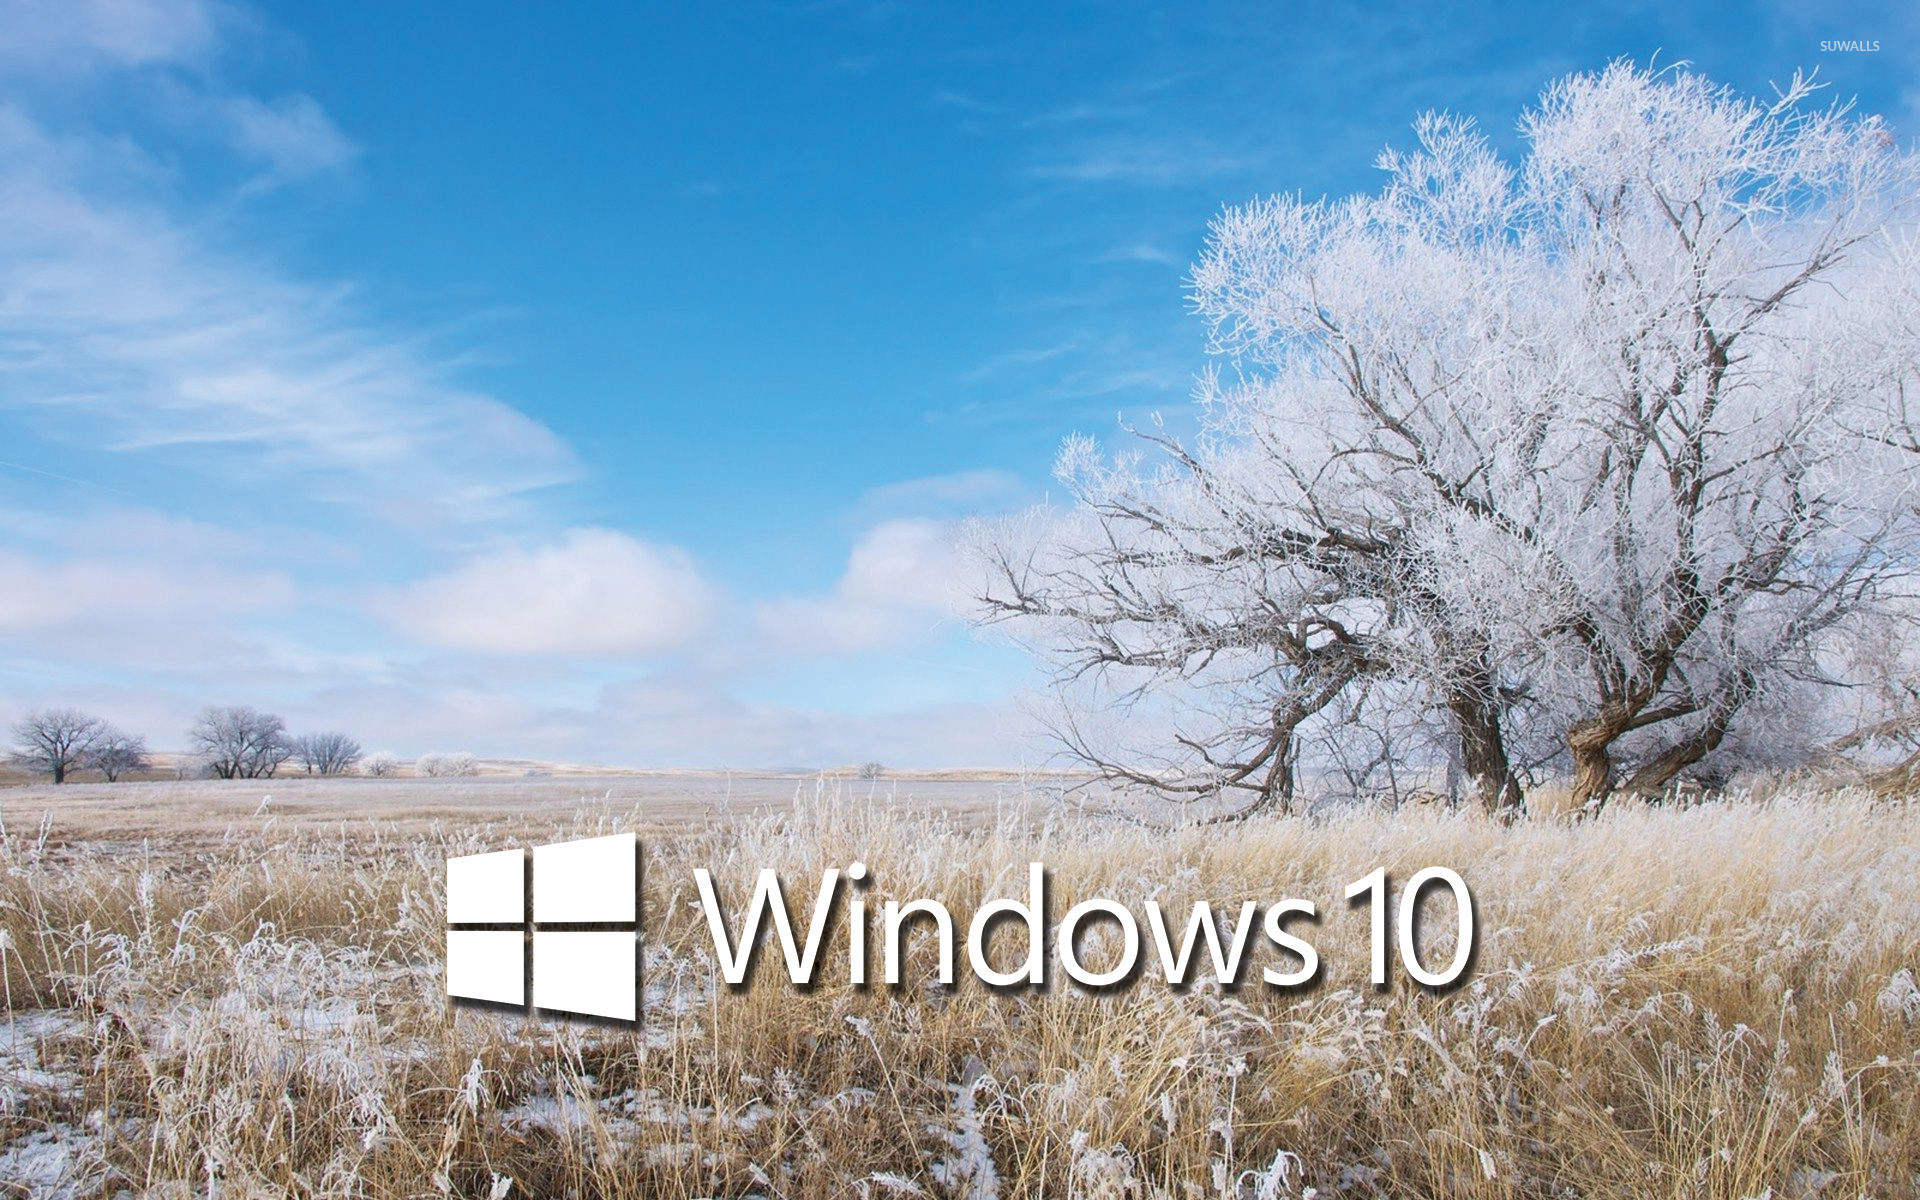 1920x1200 Windows 10 white text logo over the frosty field wallpaper